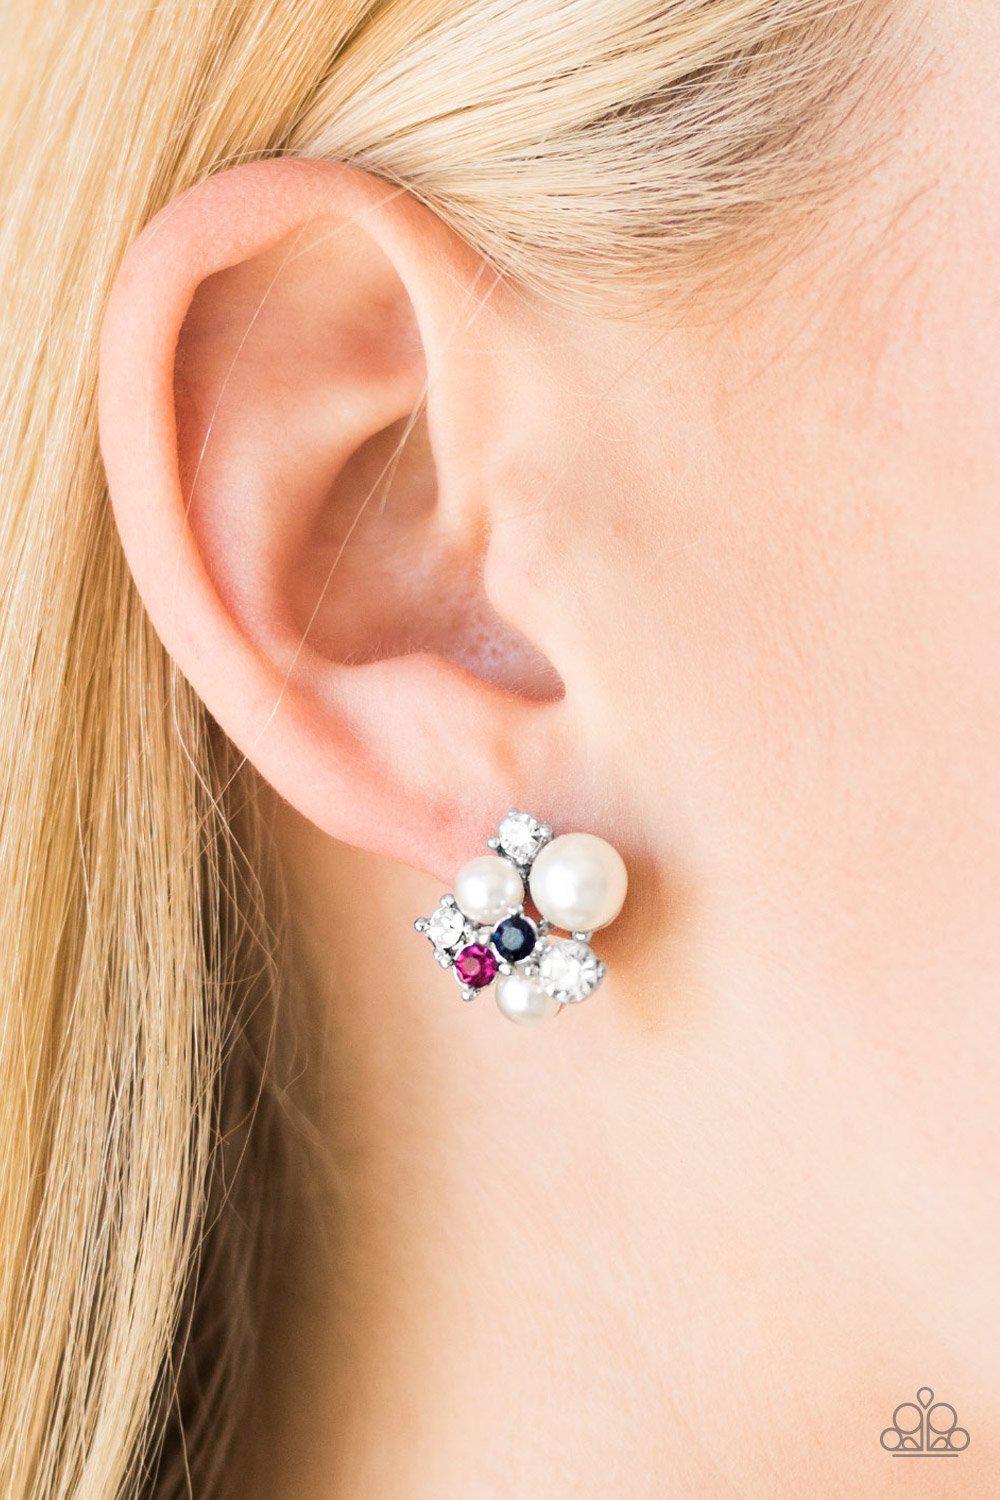 The Hostess With The POST-est Multi Pearl and Rhinestone Post Earrings - Paparazzi Accessories - model -CarasShop.com - $5 Jewelry by Cara Jewels